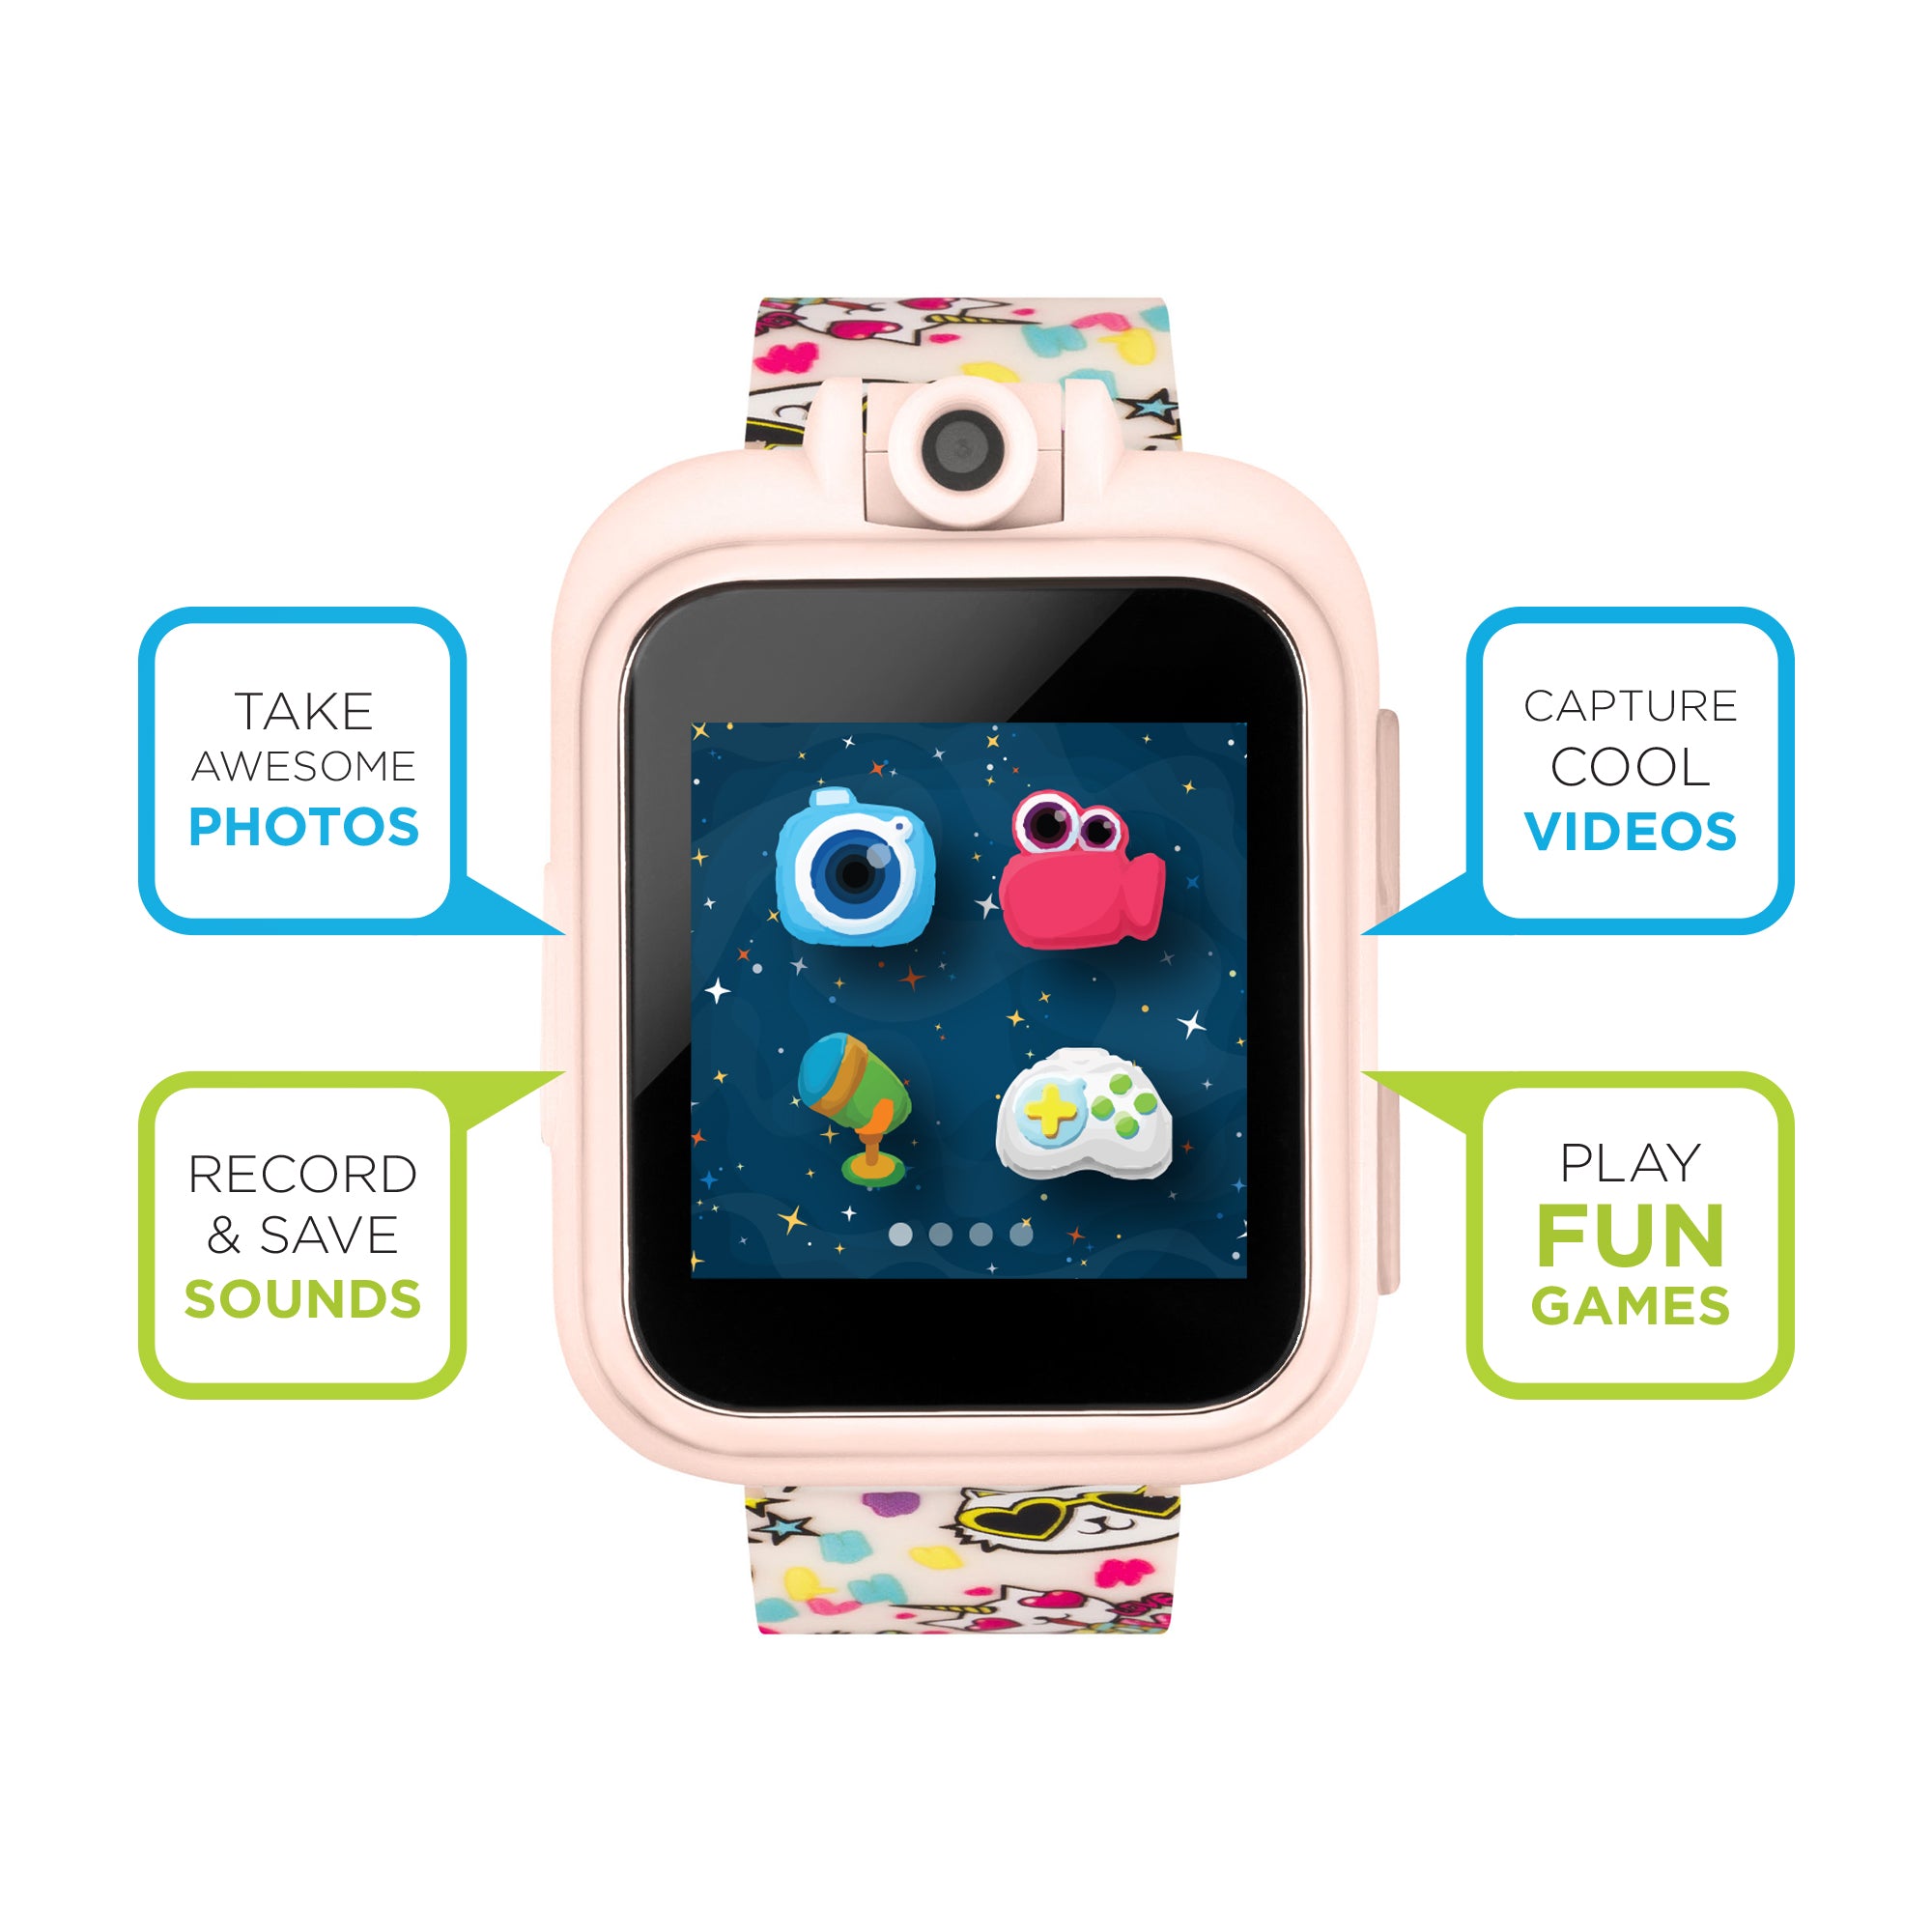 PlayZoom Smartwatch for Kids: Blush Cats affordable smart watch